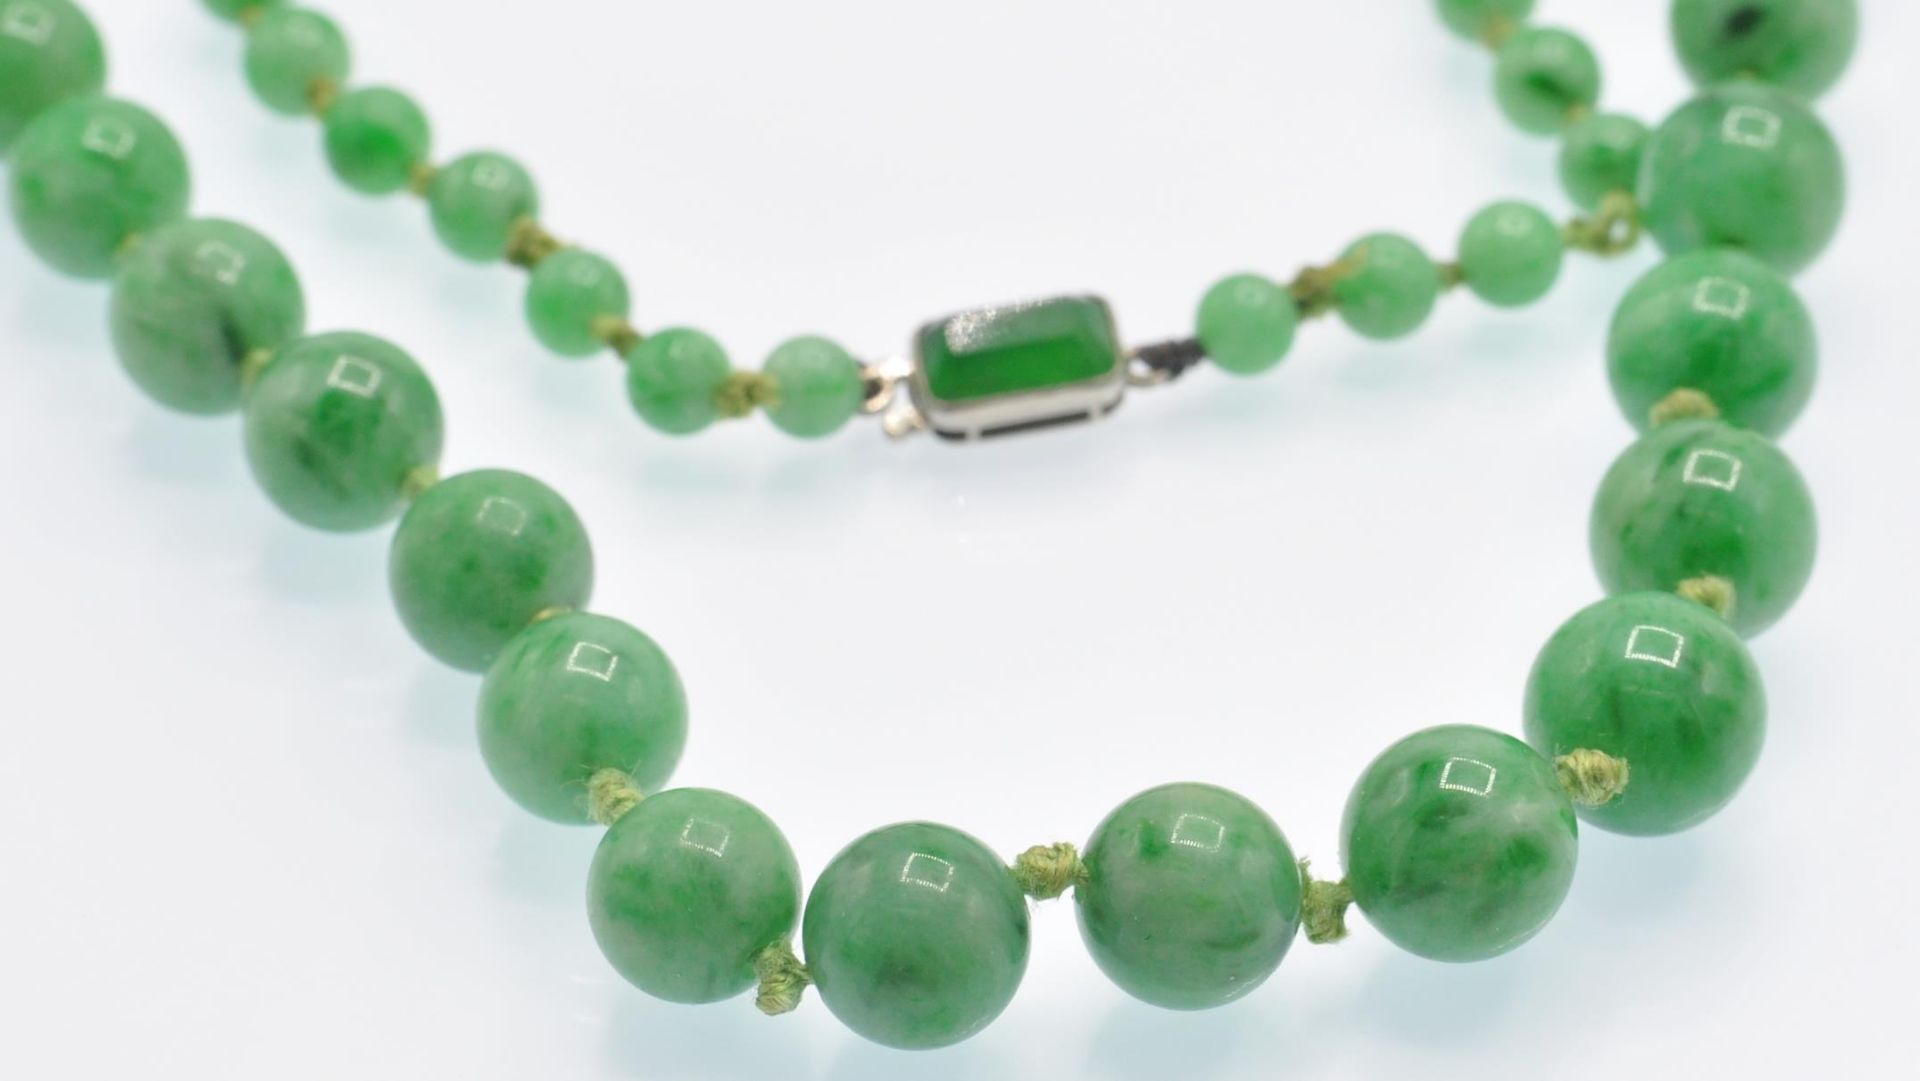 An Antique Jade Bead Necklace - Image 2 of 6